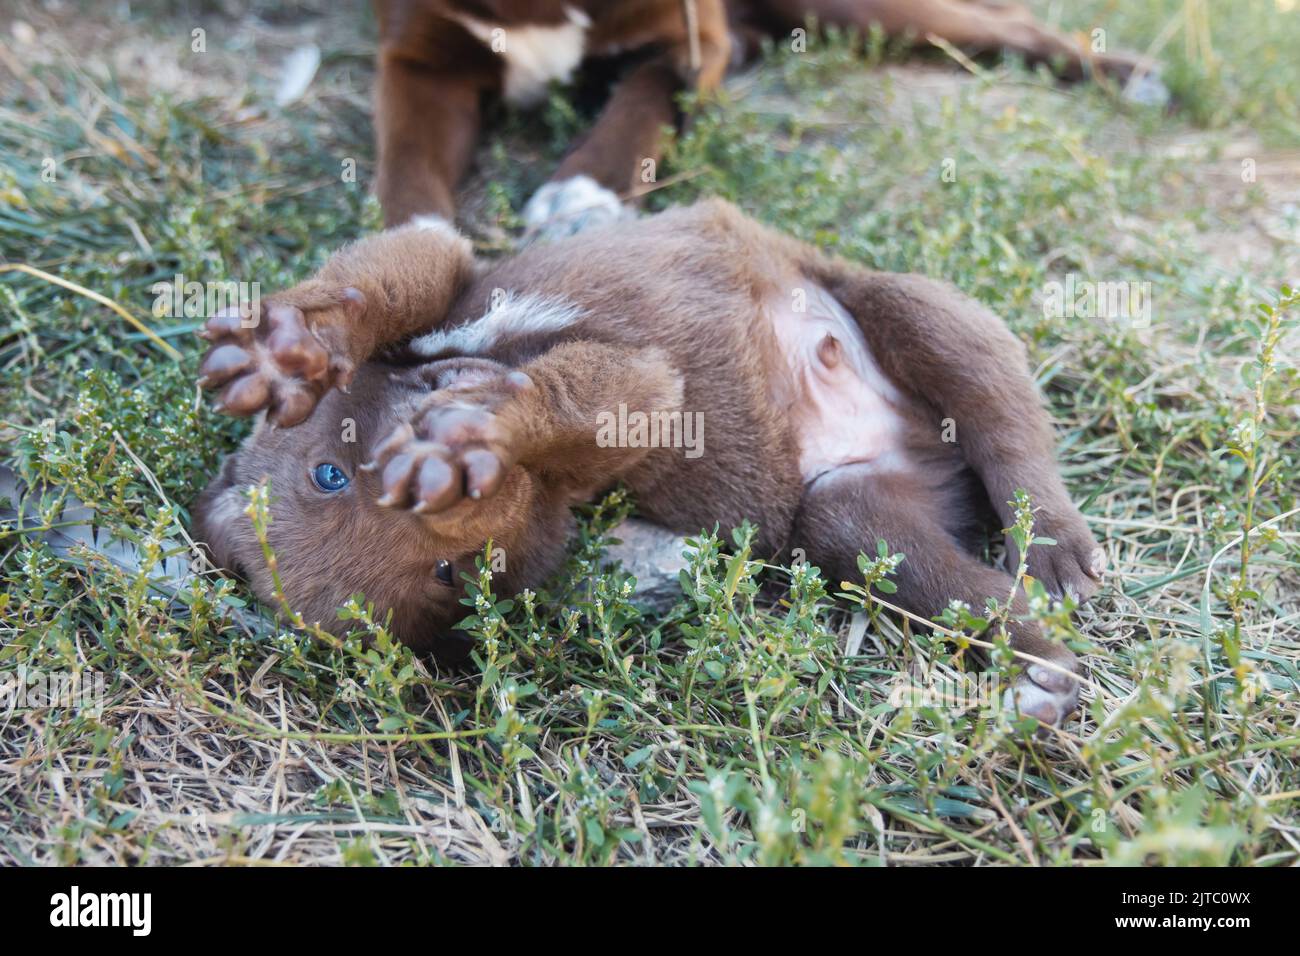 puppy that looks like a teddy bear lies in the grass Stock Photo